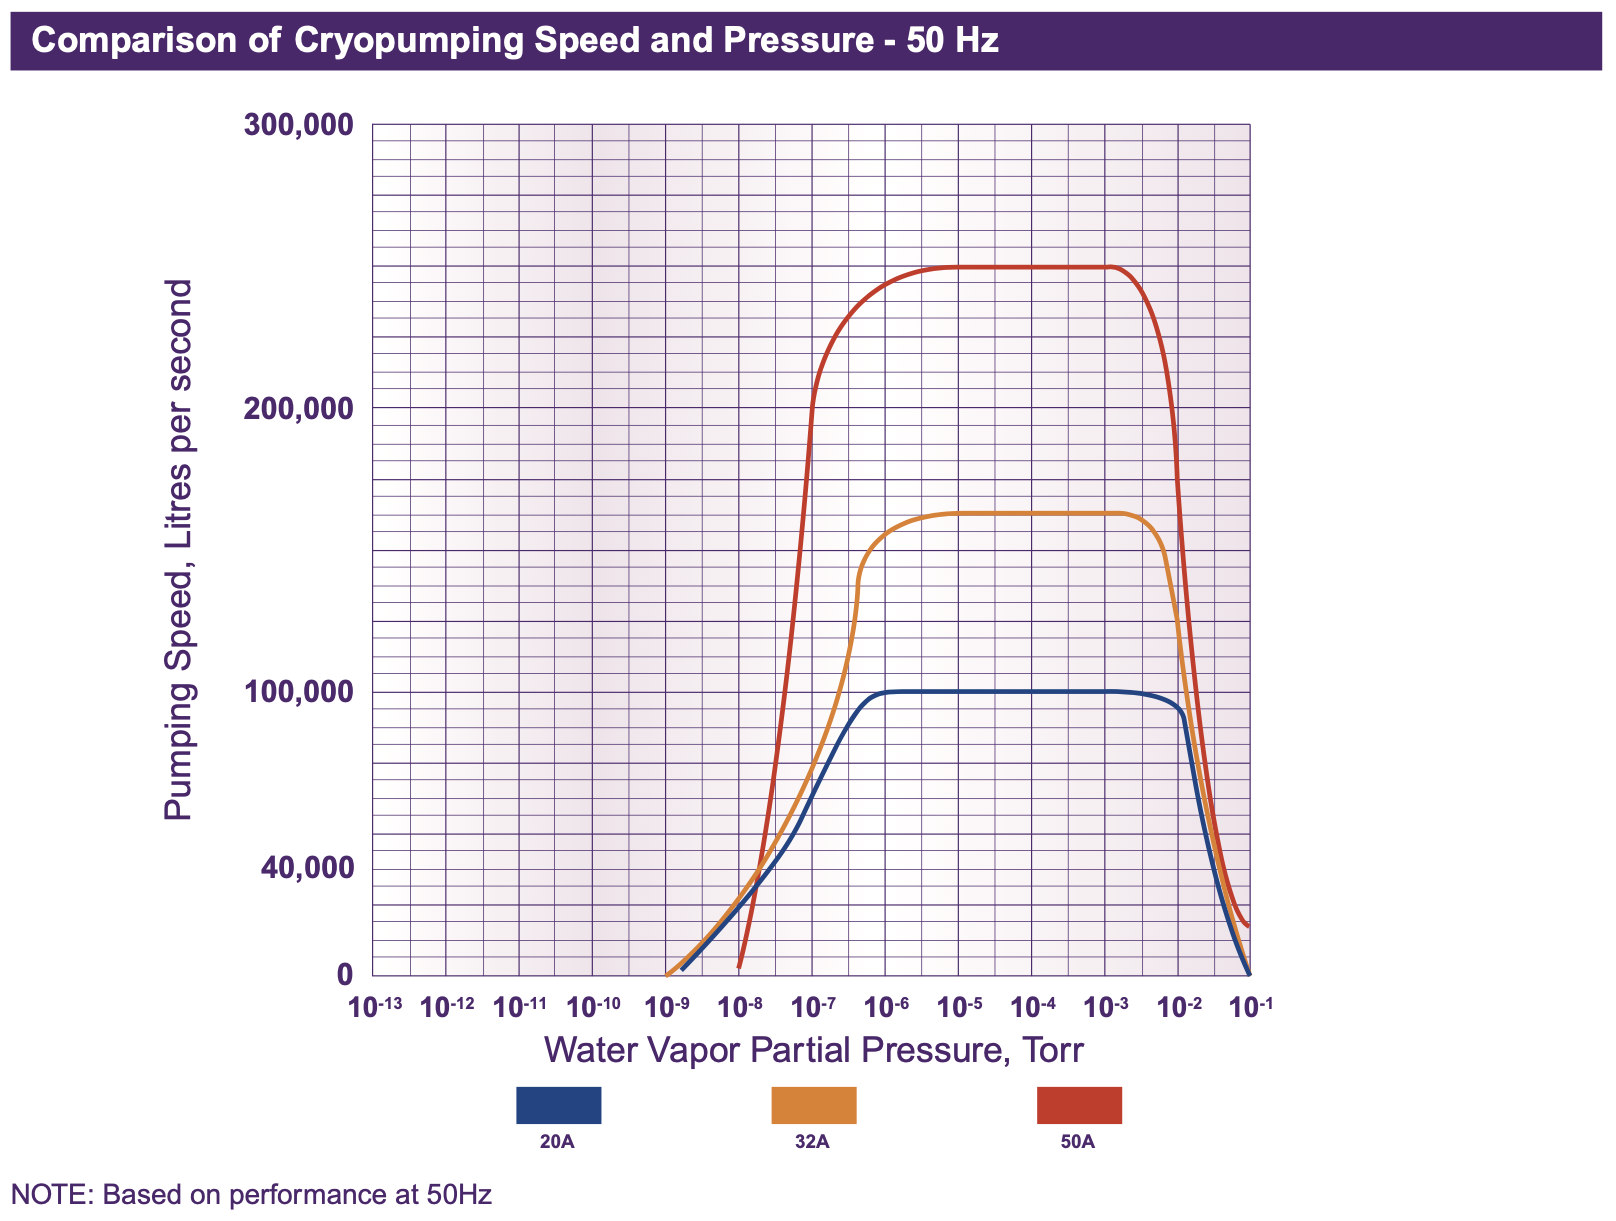 Comparison of Cryopumping Speed and Pressure - 50 Hz